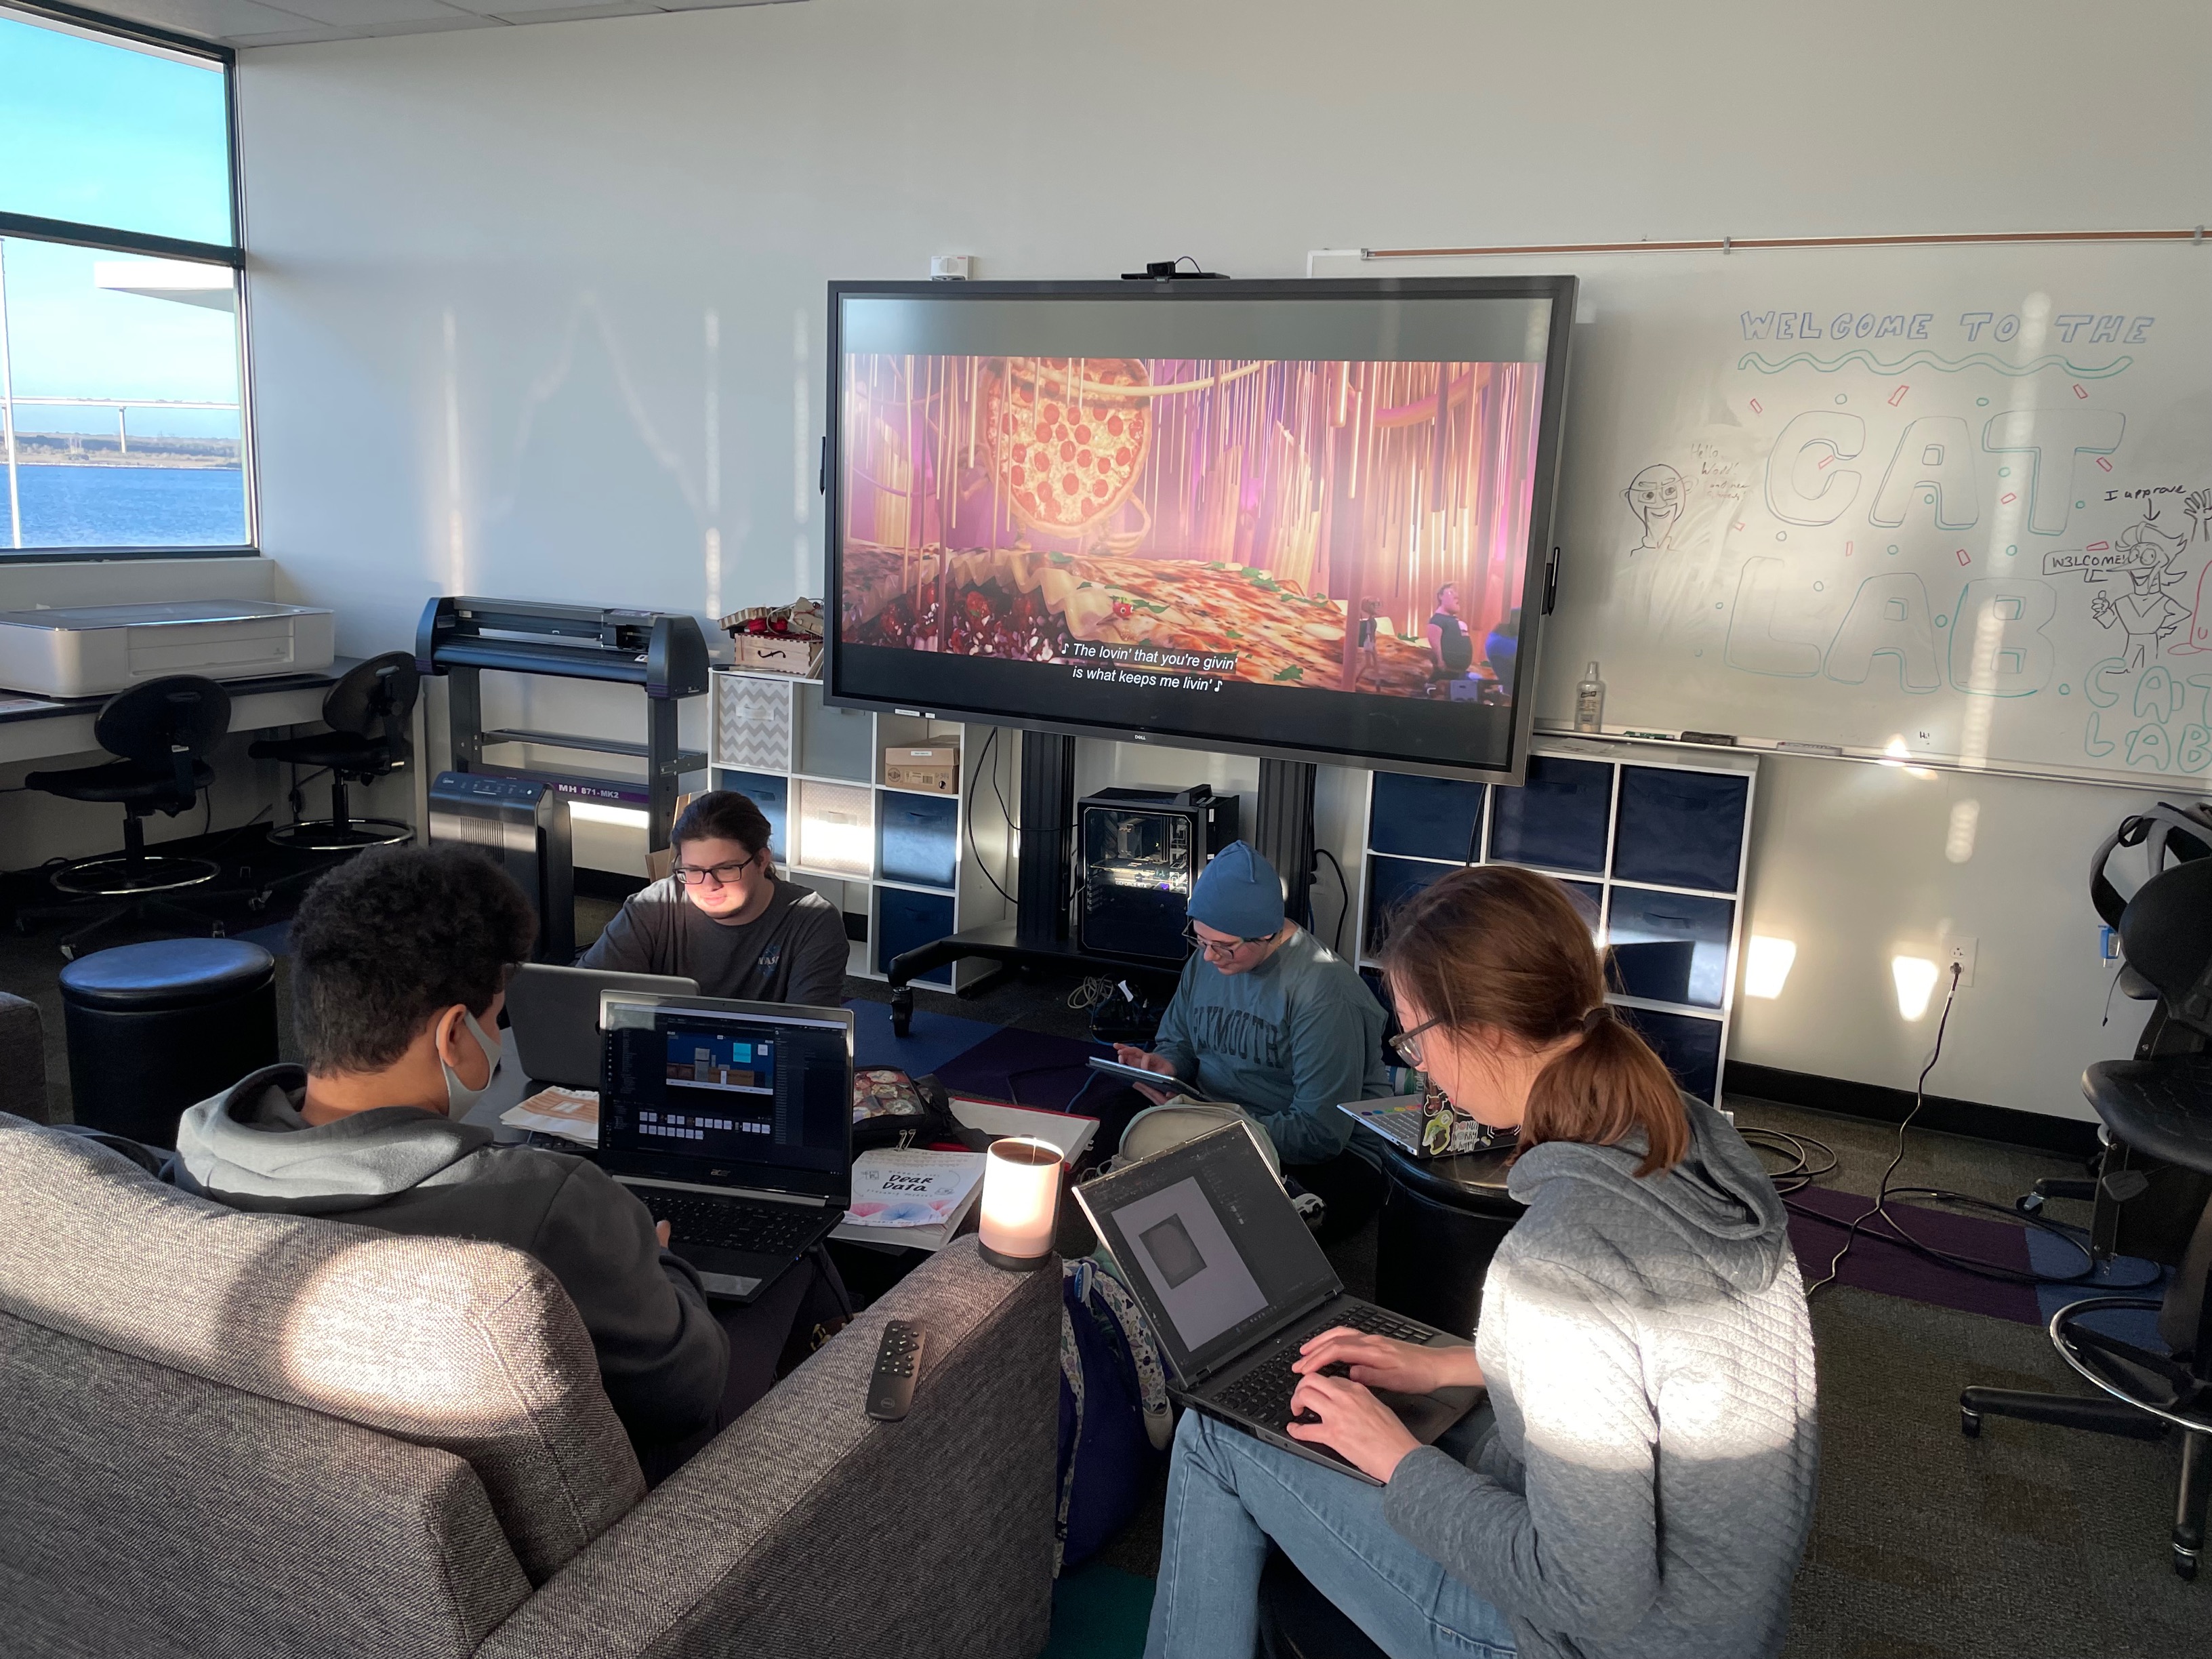 Students working during the Global Game Jam